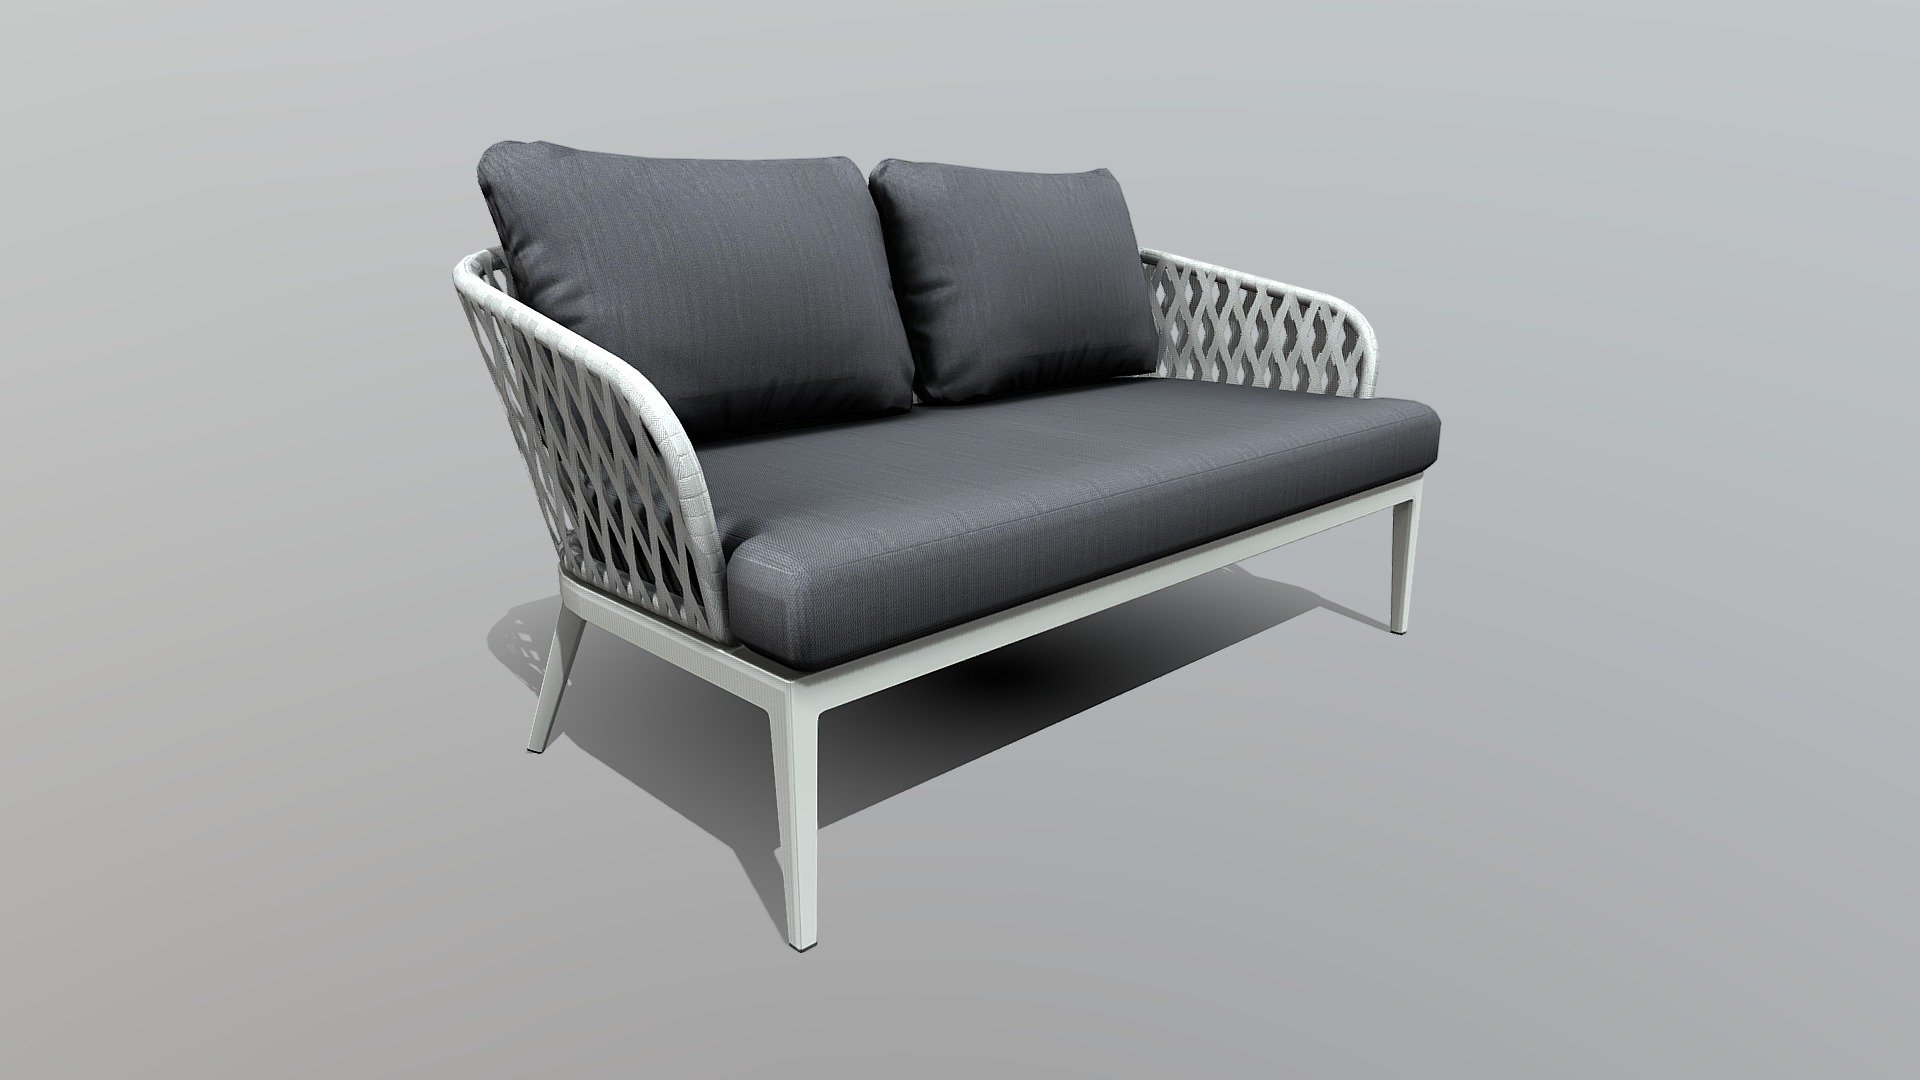 Fully baked model - Double sofa - 3D model by Victor L. (@viclvp) 3d model